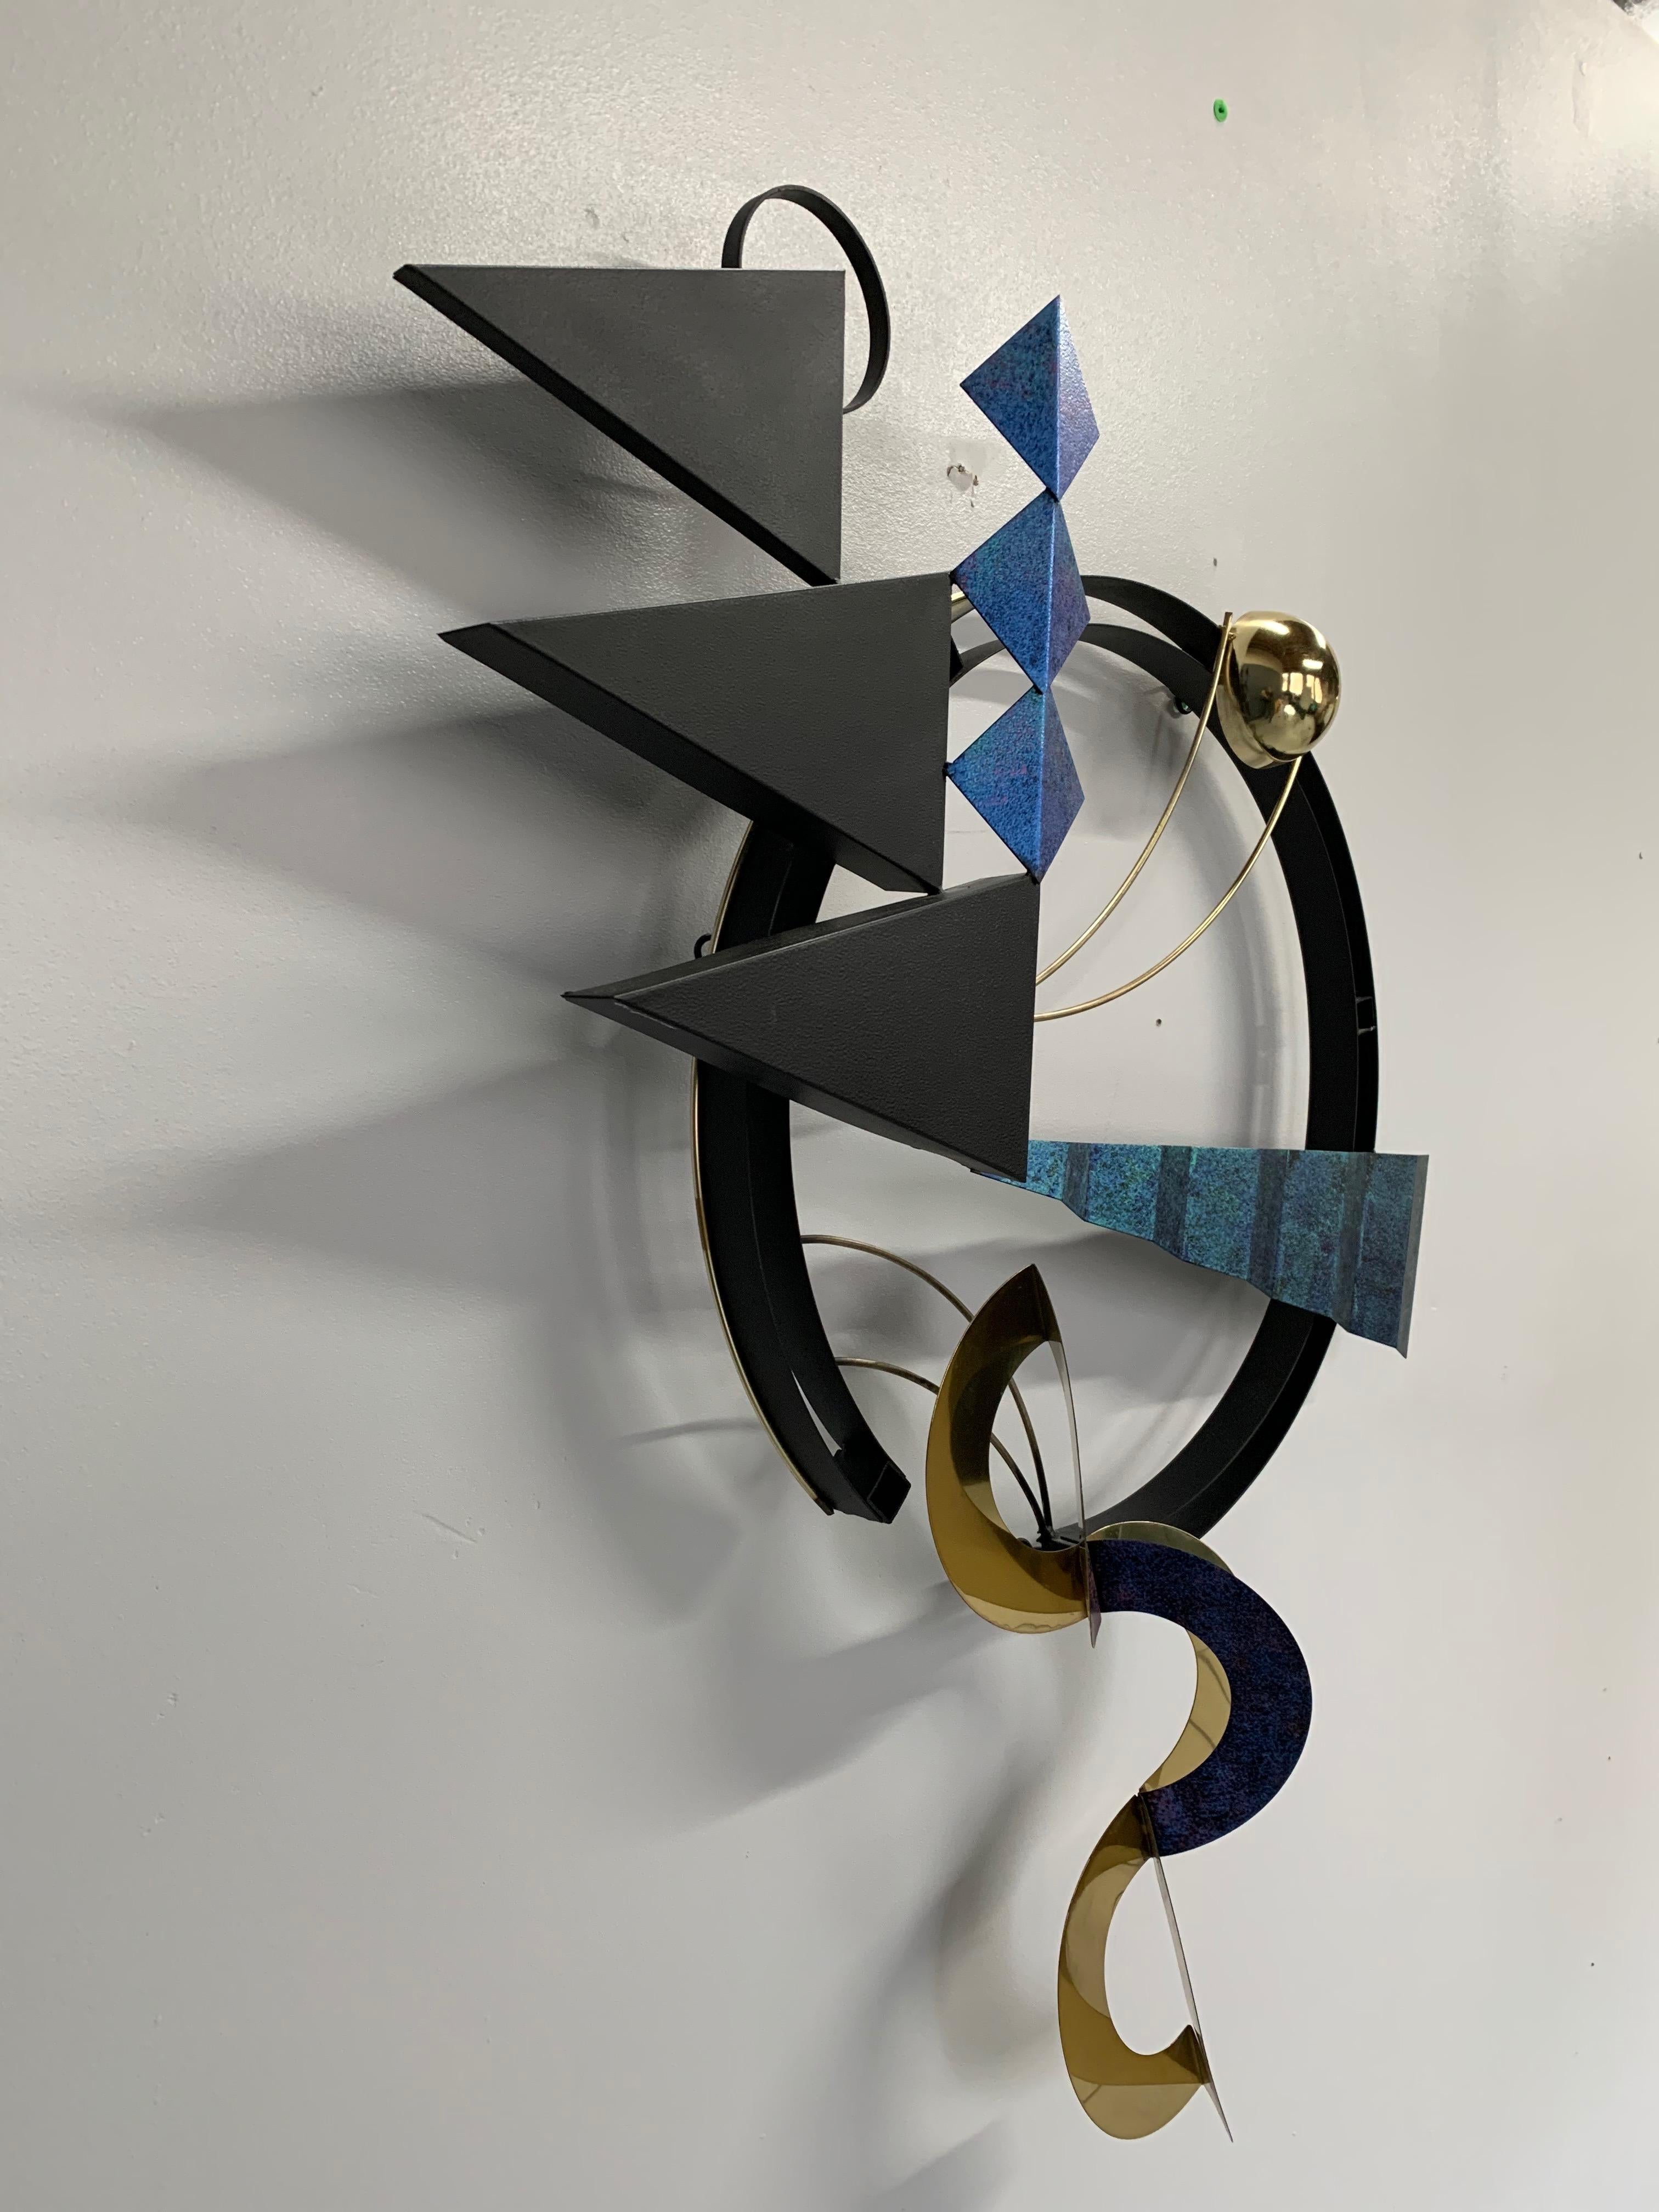 North American Curtis Jere 1996 Postmodern Brass and Enamel Metal Wall Sculpture